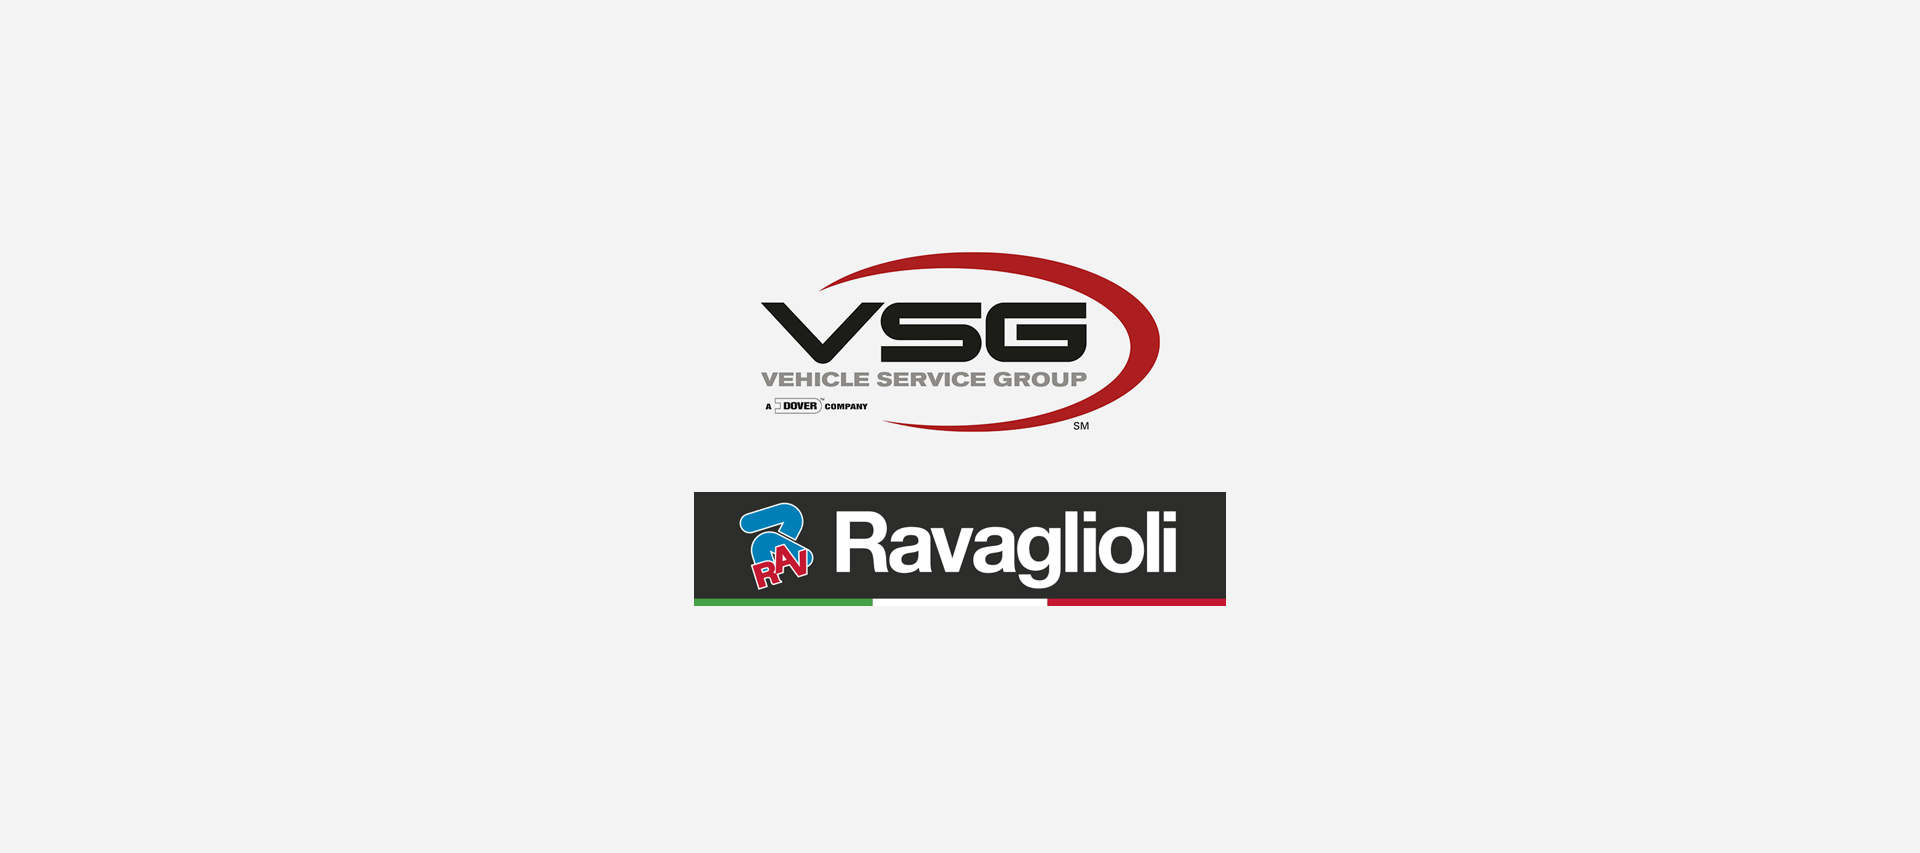 Vehicle Service Group acquires Ravaglioli S.p.A. Group